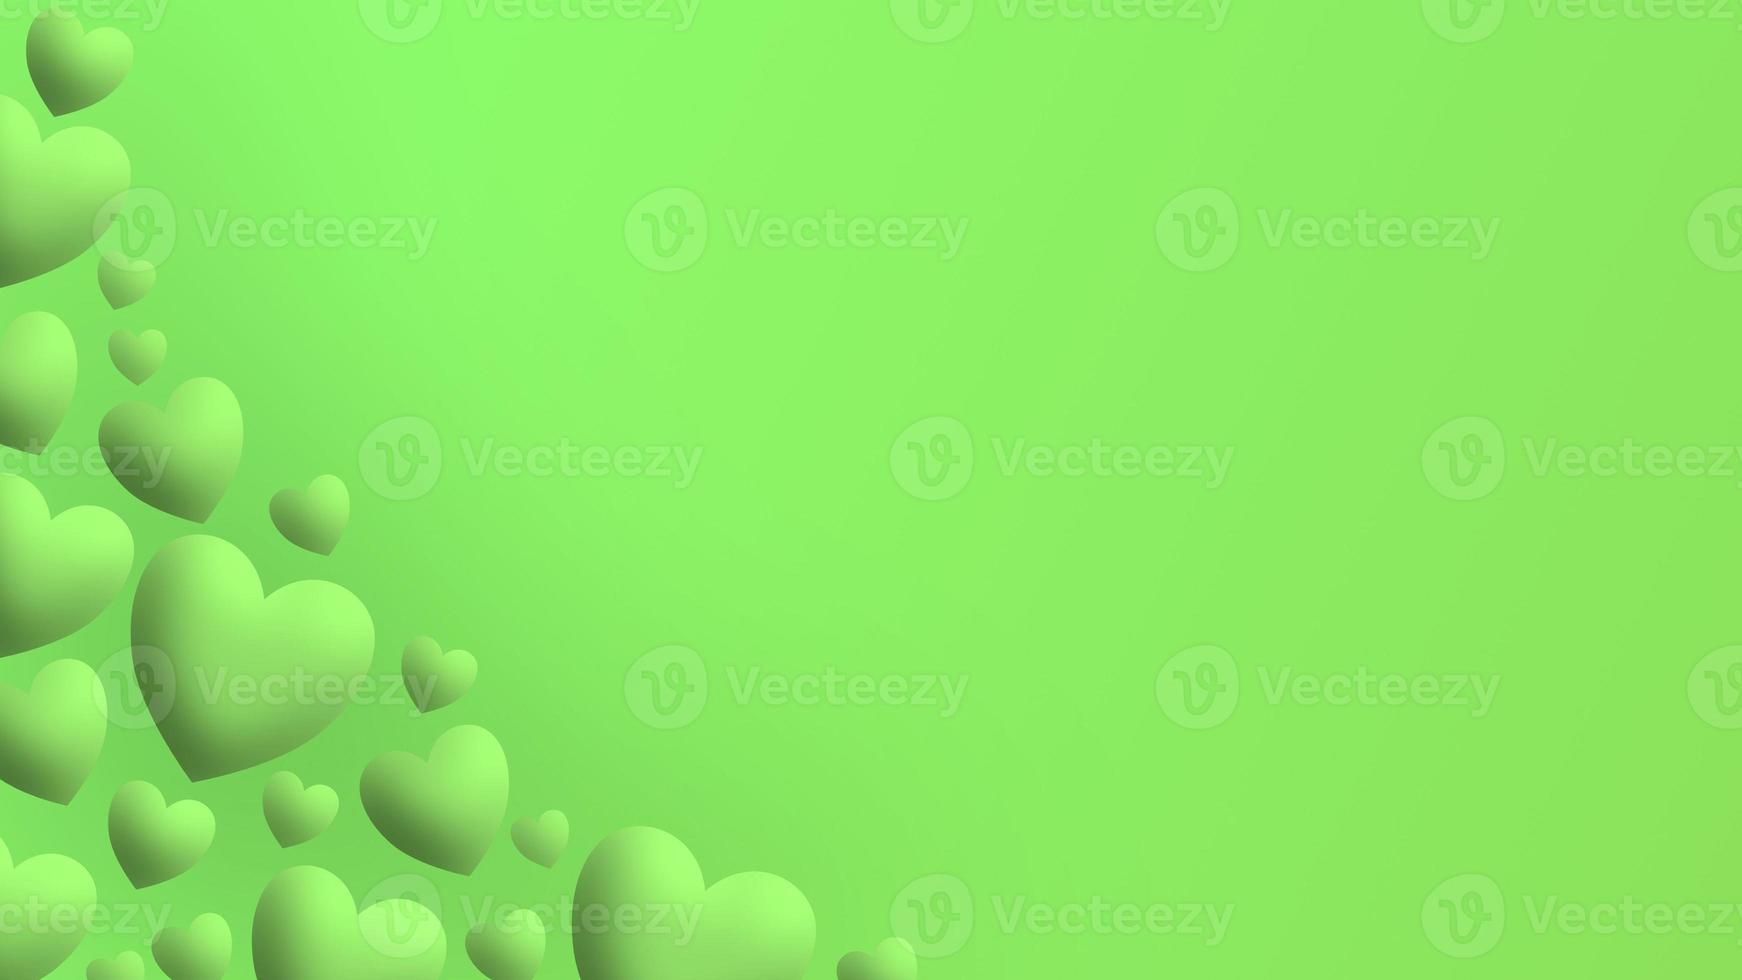 simple 3d diagonal border frame stack of green heart for wallpaper and presentation background template photo